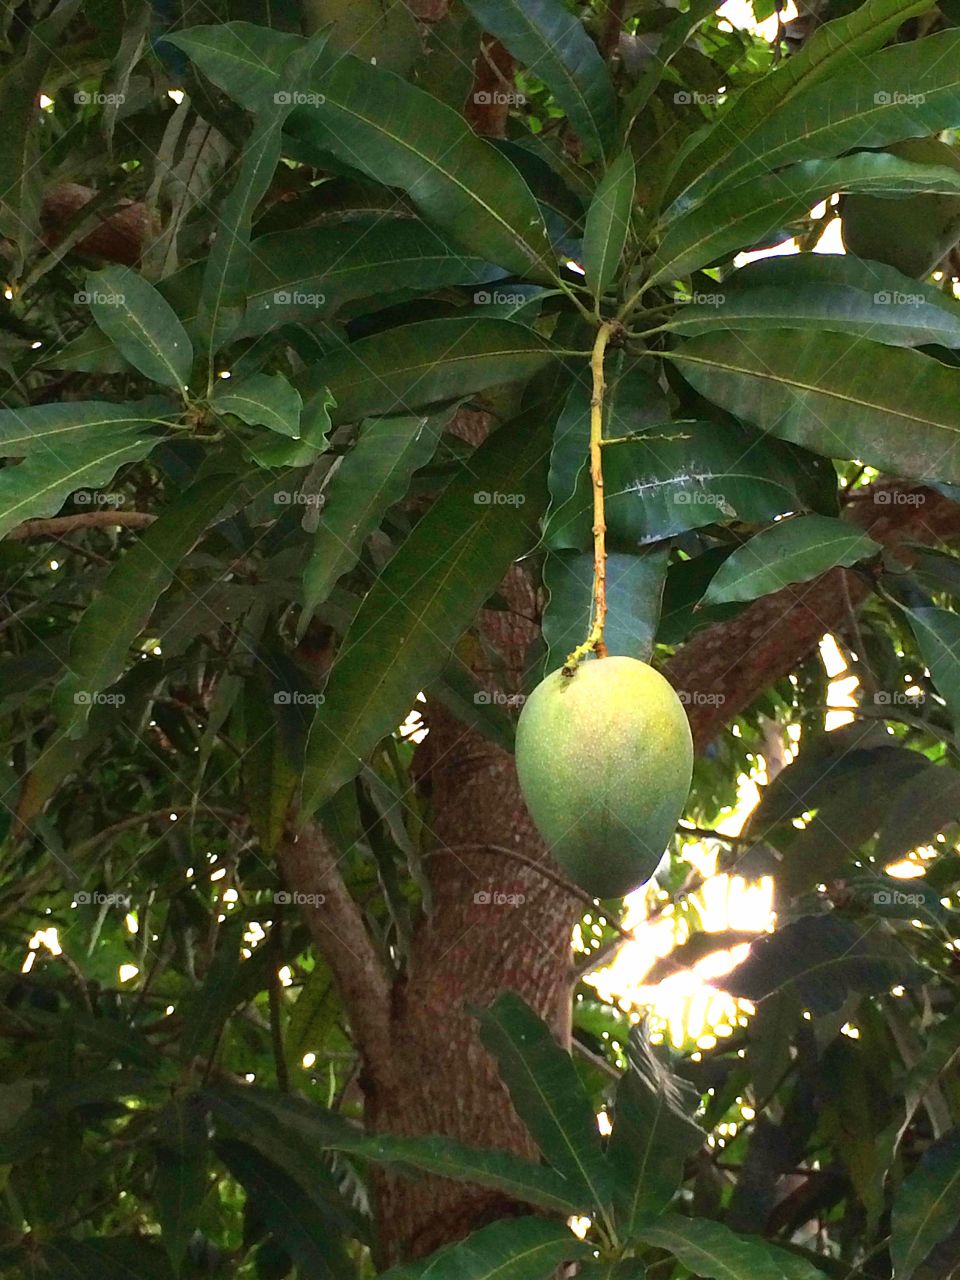 Free Food. Mangos grow wild everywhere so anyone can have a bite.